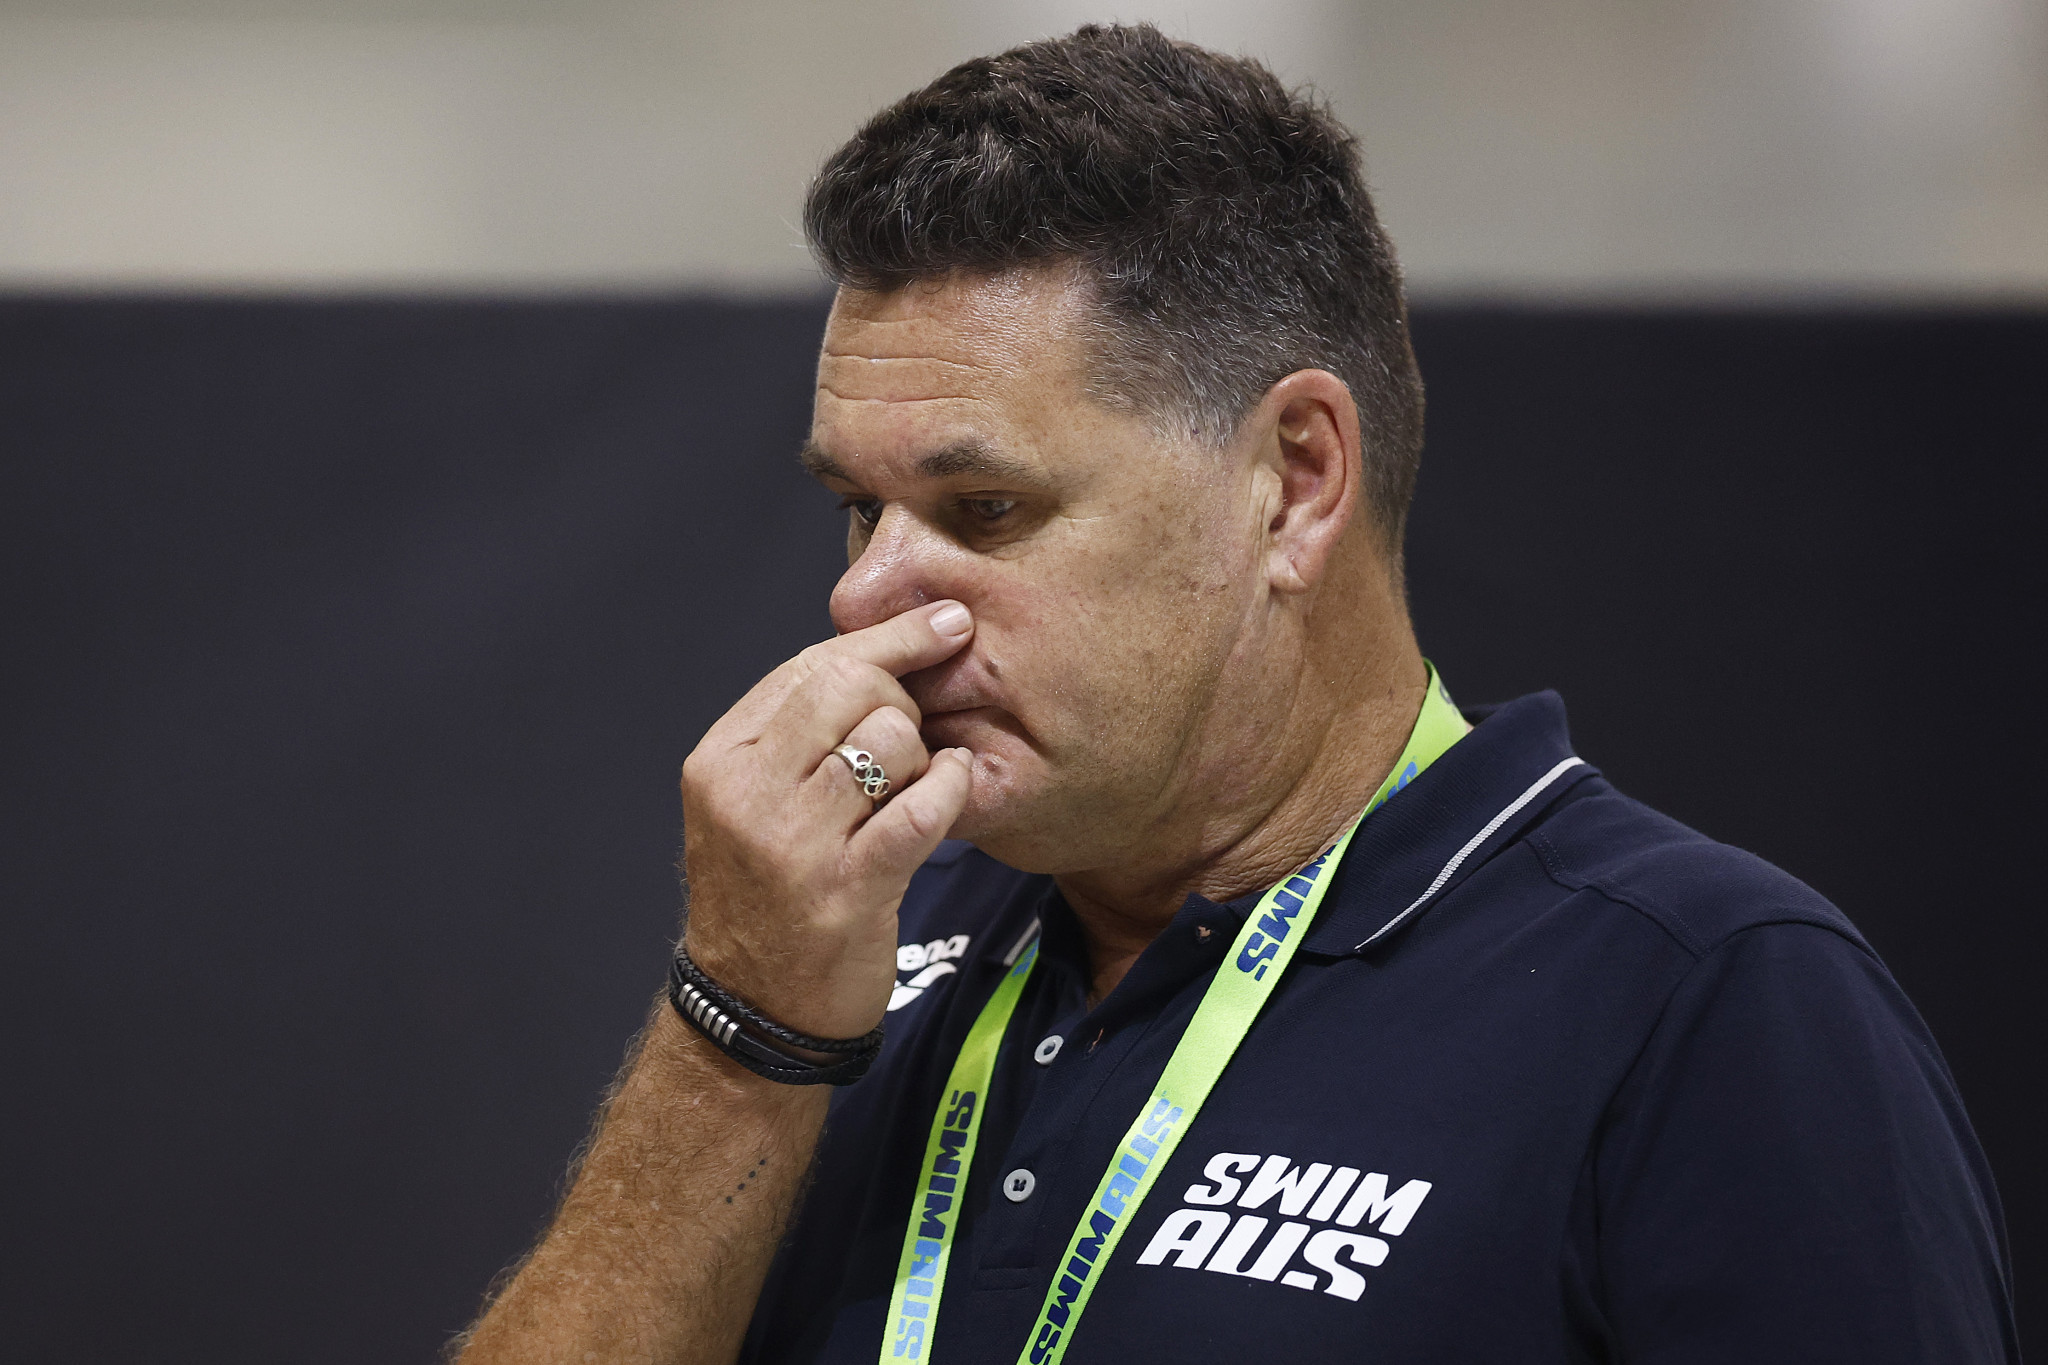 Australia's Rohan Taylor considers the WADA distraction a 